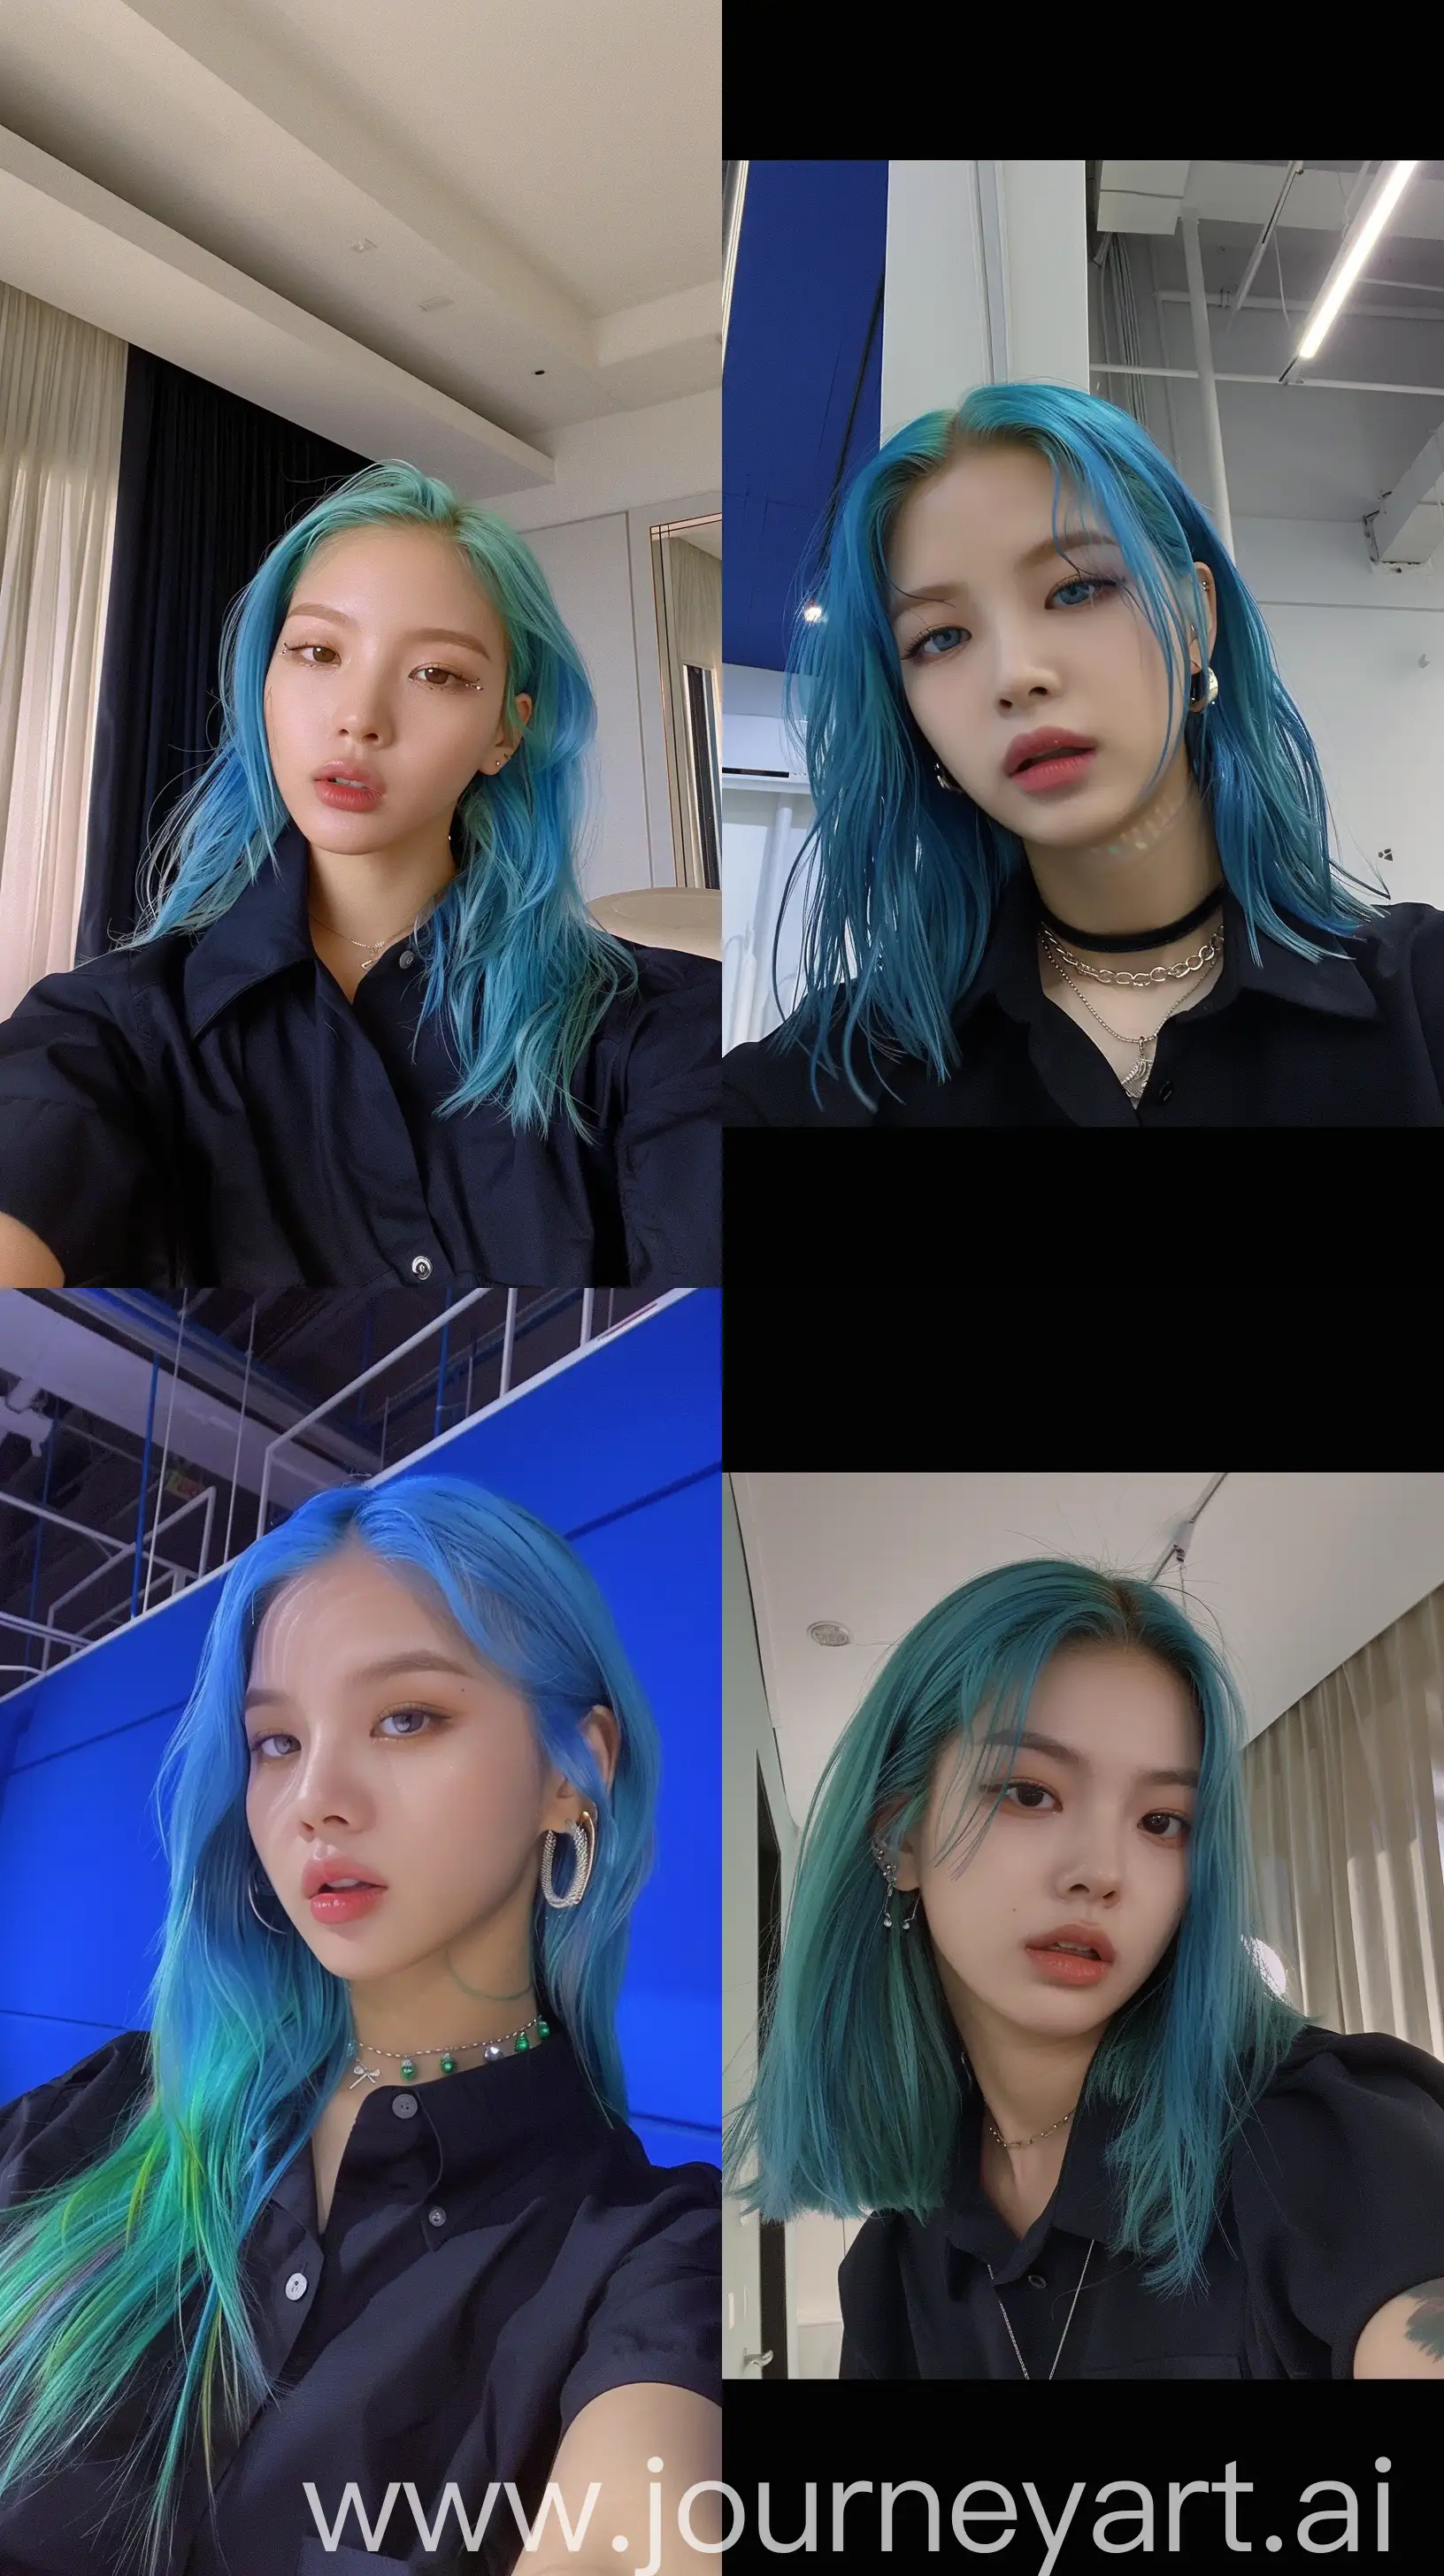 Jennie-from-Blackpink-with-Blue-Wolfcut-Hair-in-Stylish-Selfie